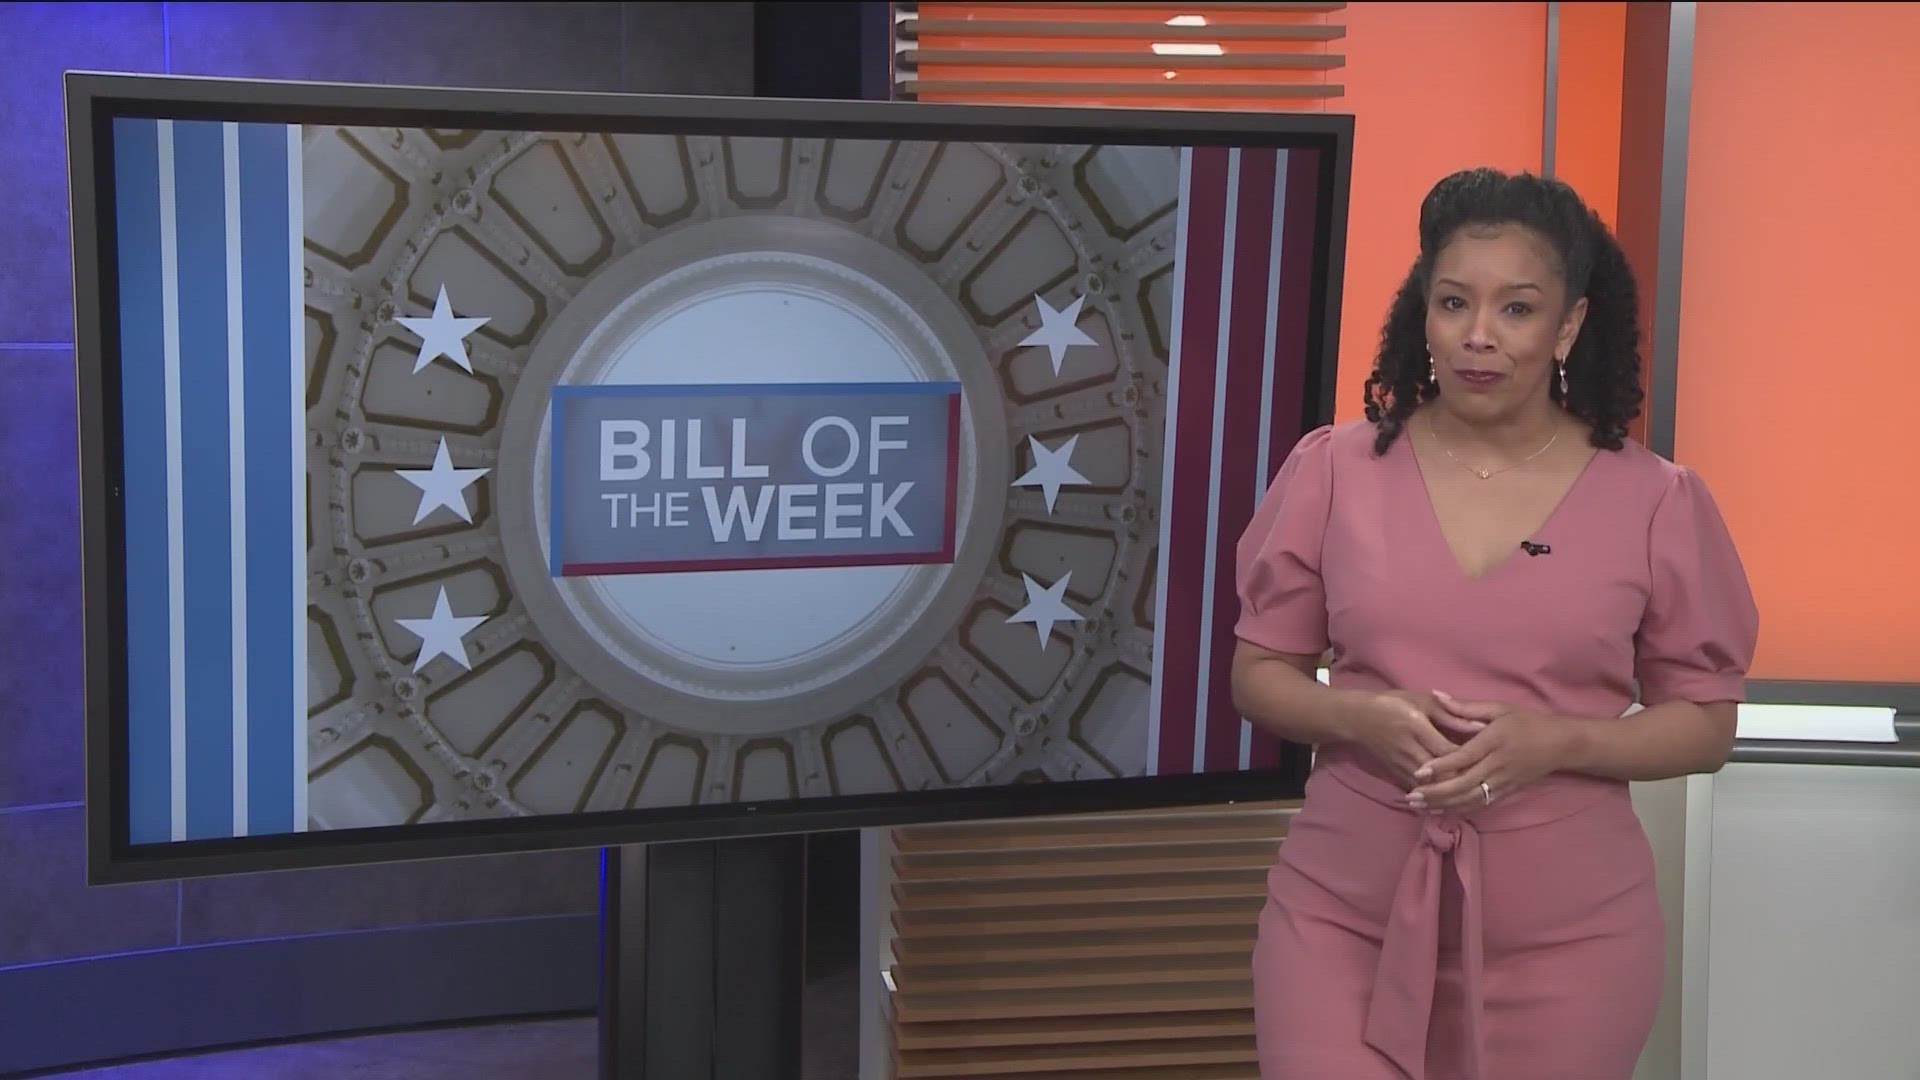 For this Bill of the Week segment, KVUE's Ashley Goudeau looks at the CROWN Act, which bans hair discrimination. The House overwhelmingly passed it this week.